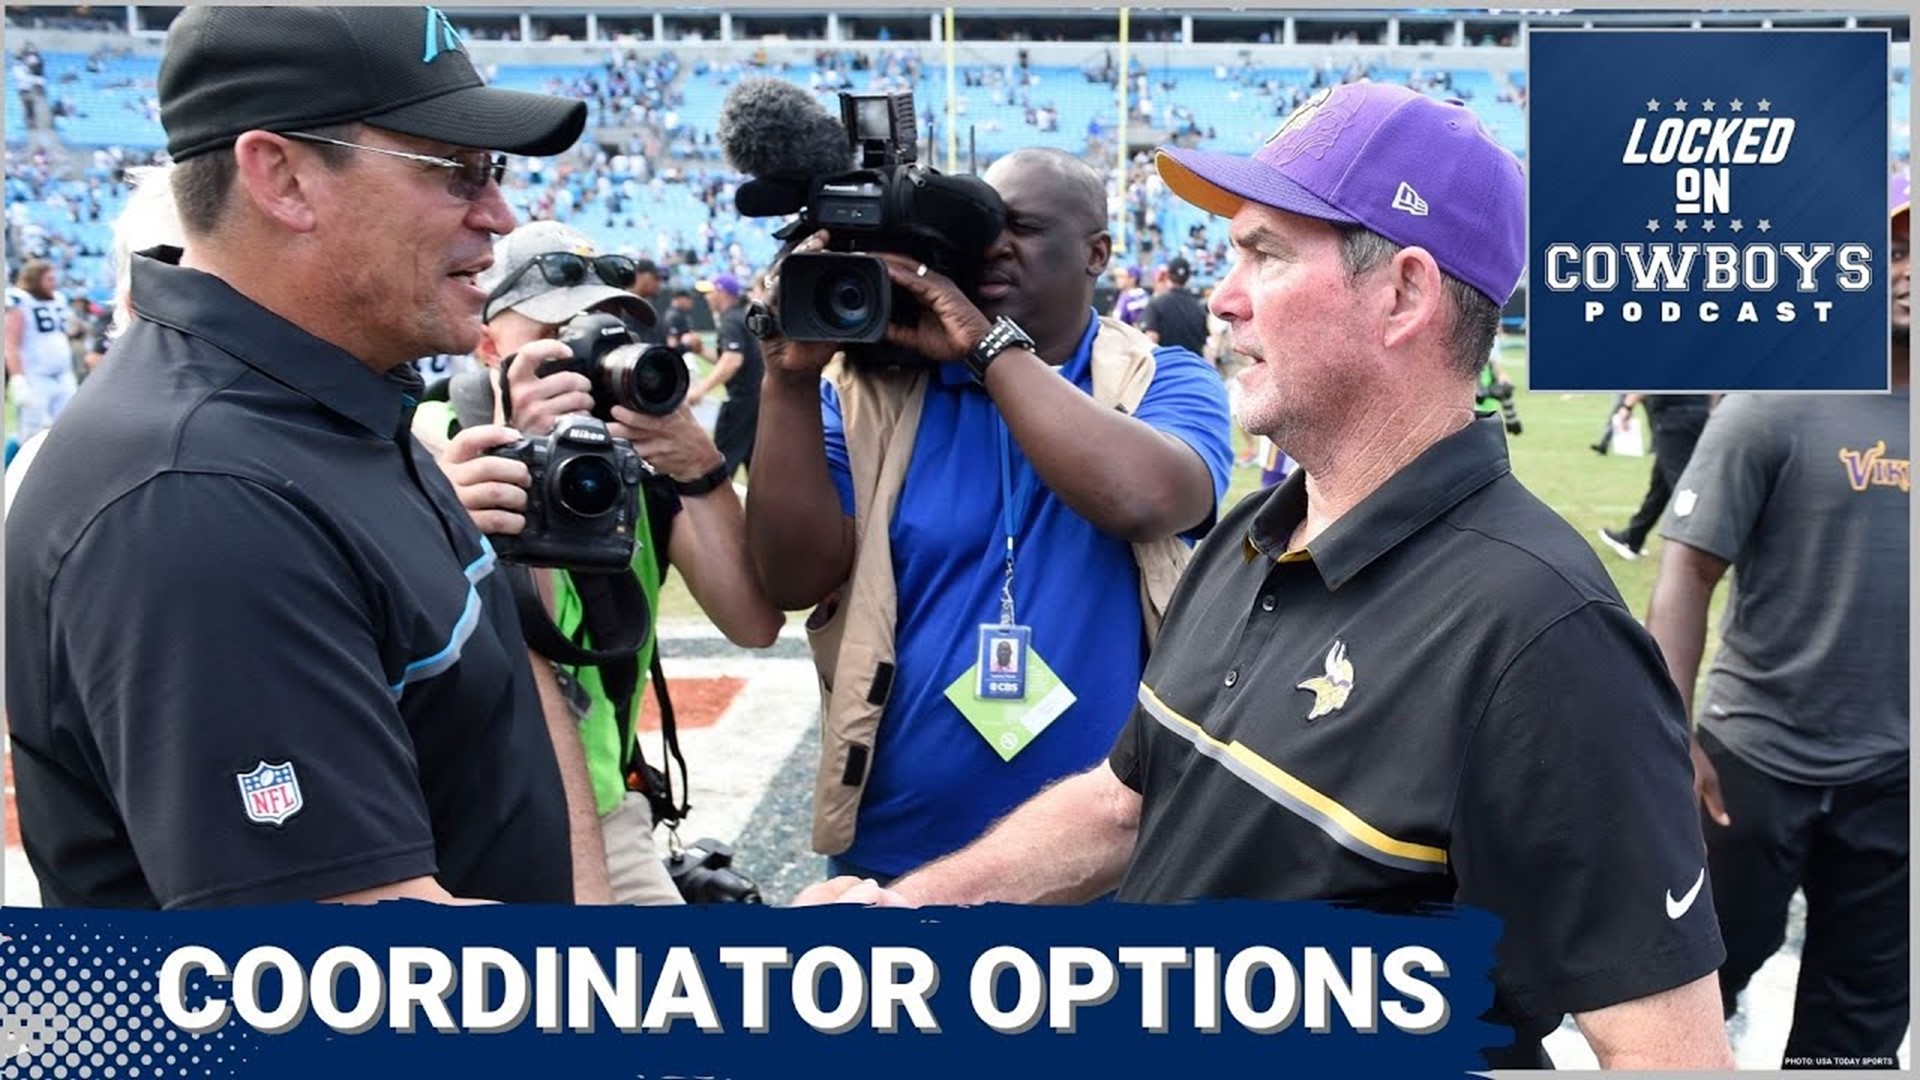 The Dallas Cowboys are scheduled to interview several defensive coordinators this week including Mike Zimmer and Ron Rivera